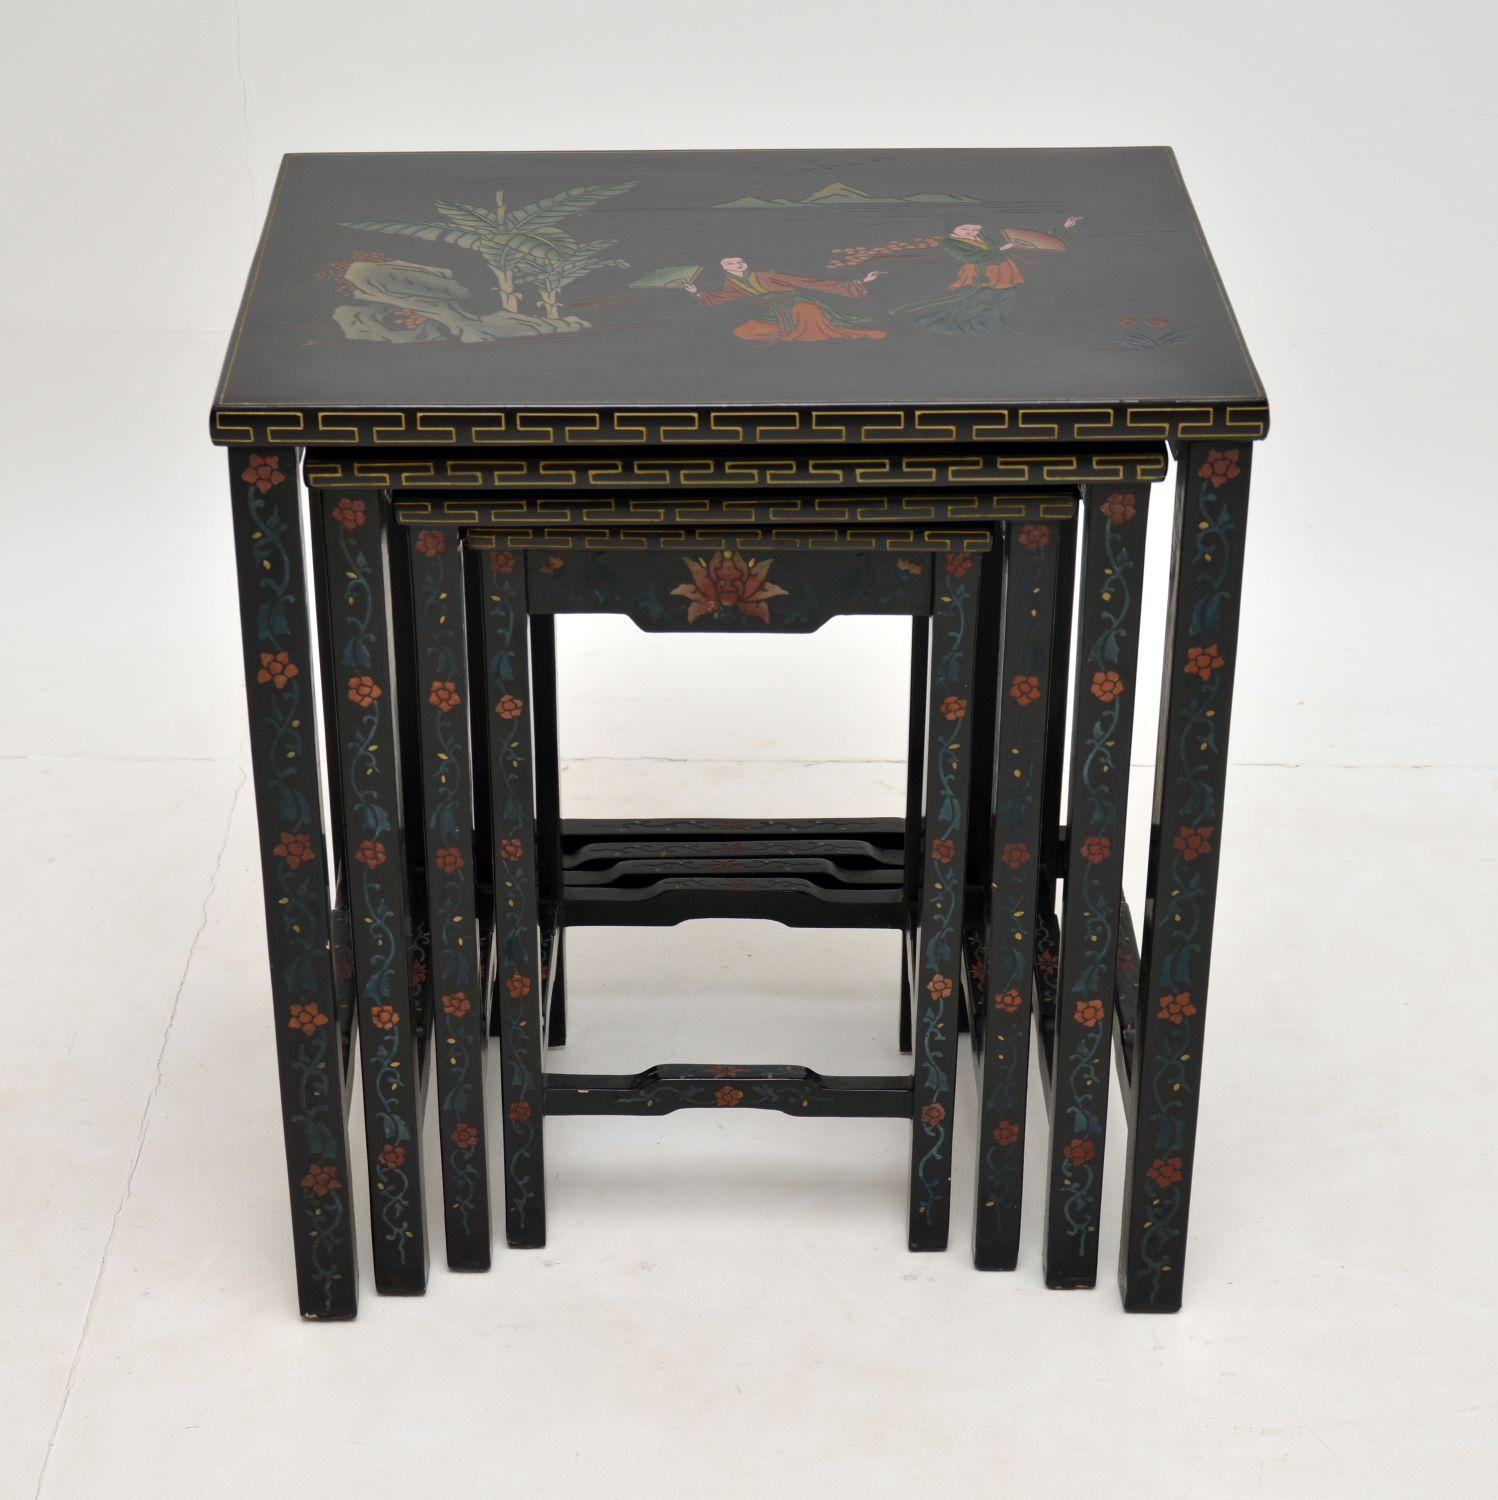 A beautifully designed nest of three tables in the antique Chinese style. These date from around the 1950’s.

The quality is excellent, they are decorated with gorgeous lacquered chinoiserie. The tops have colourful scenes of traditional Chinese